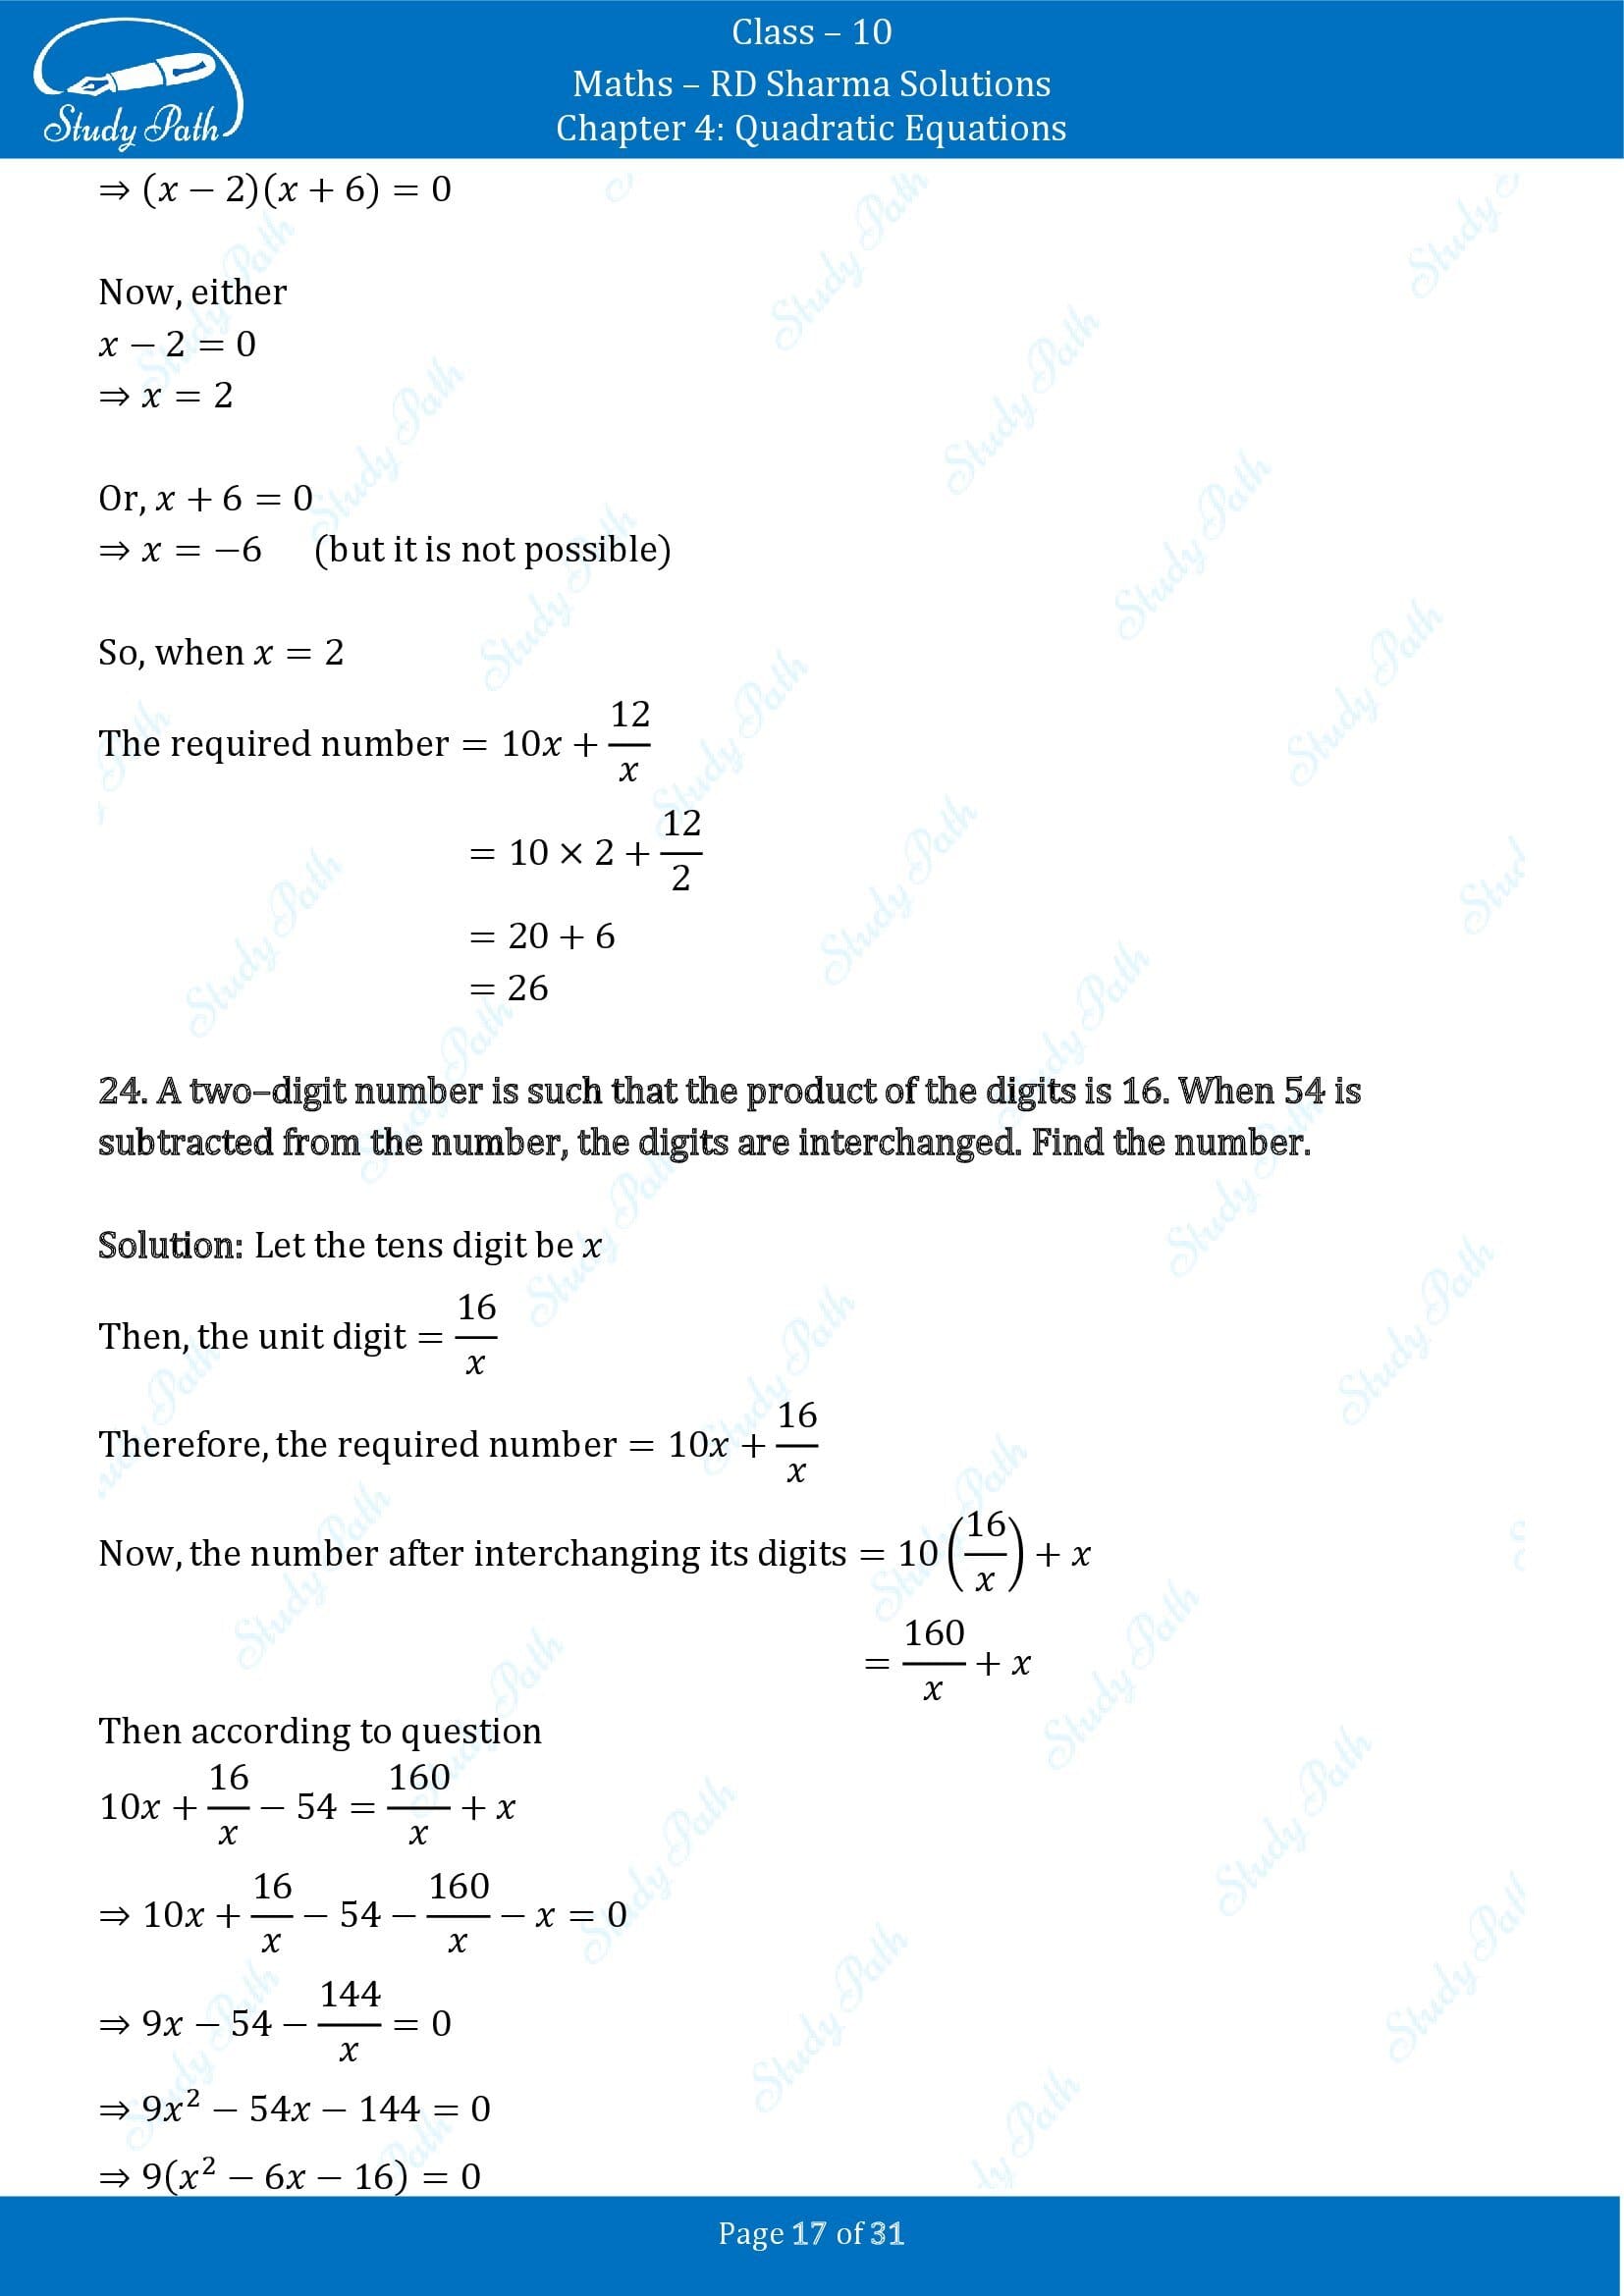 RD Sharma Solutions Class 10 Chapter 4 Quadratic Equations Exercise 4.7 00017